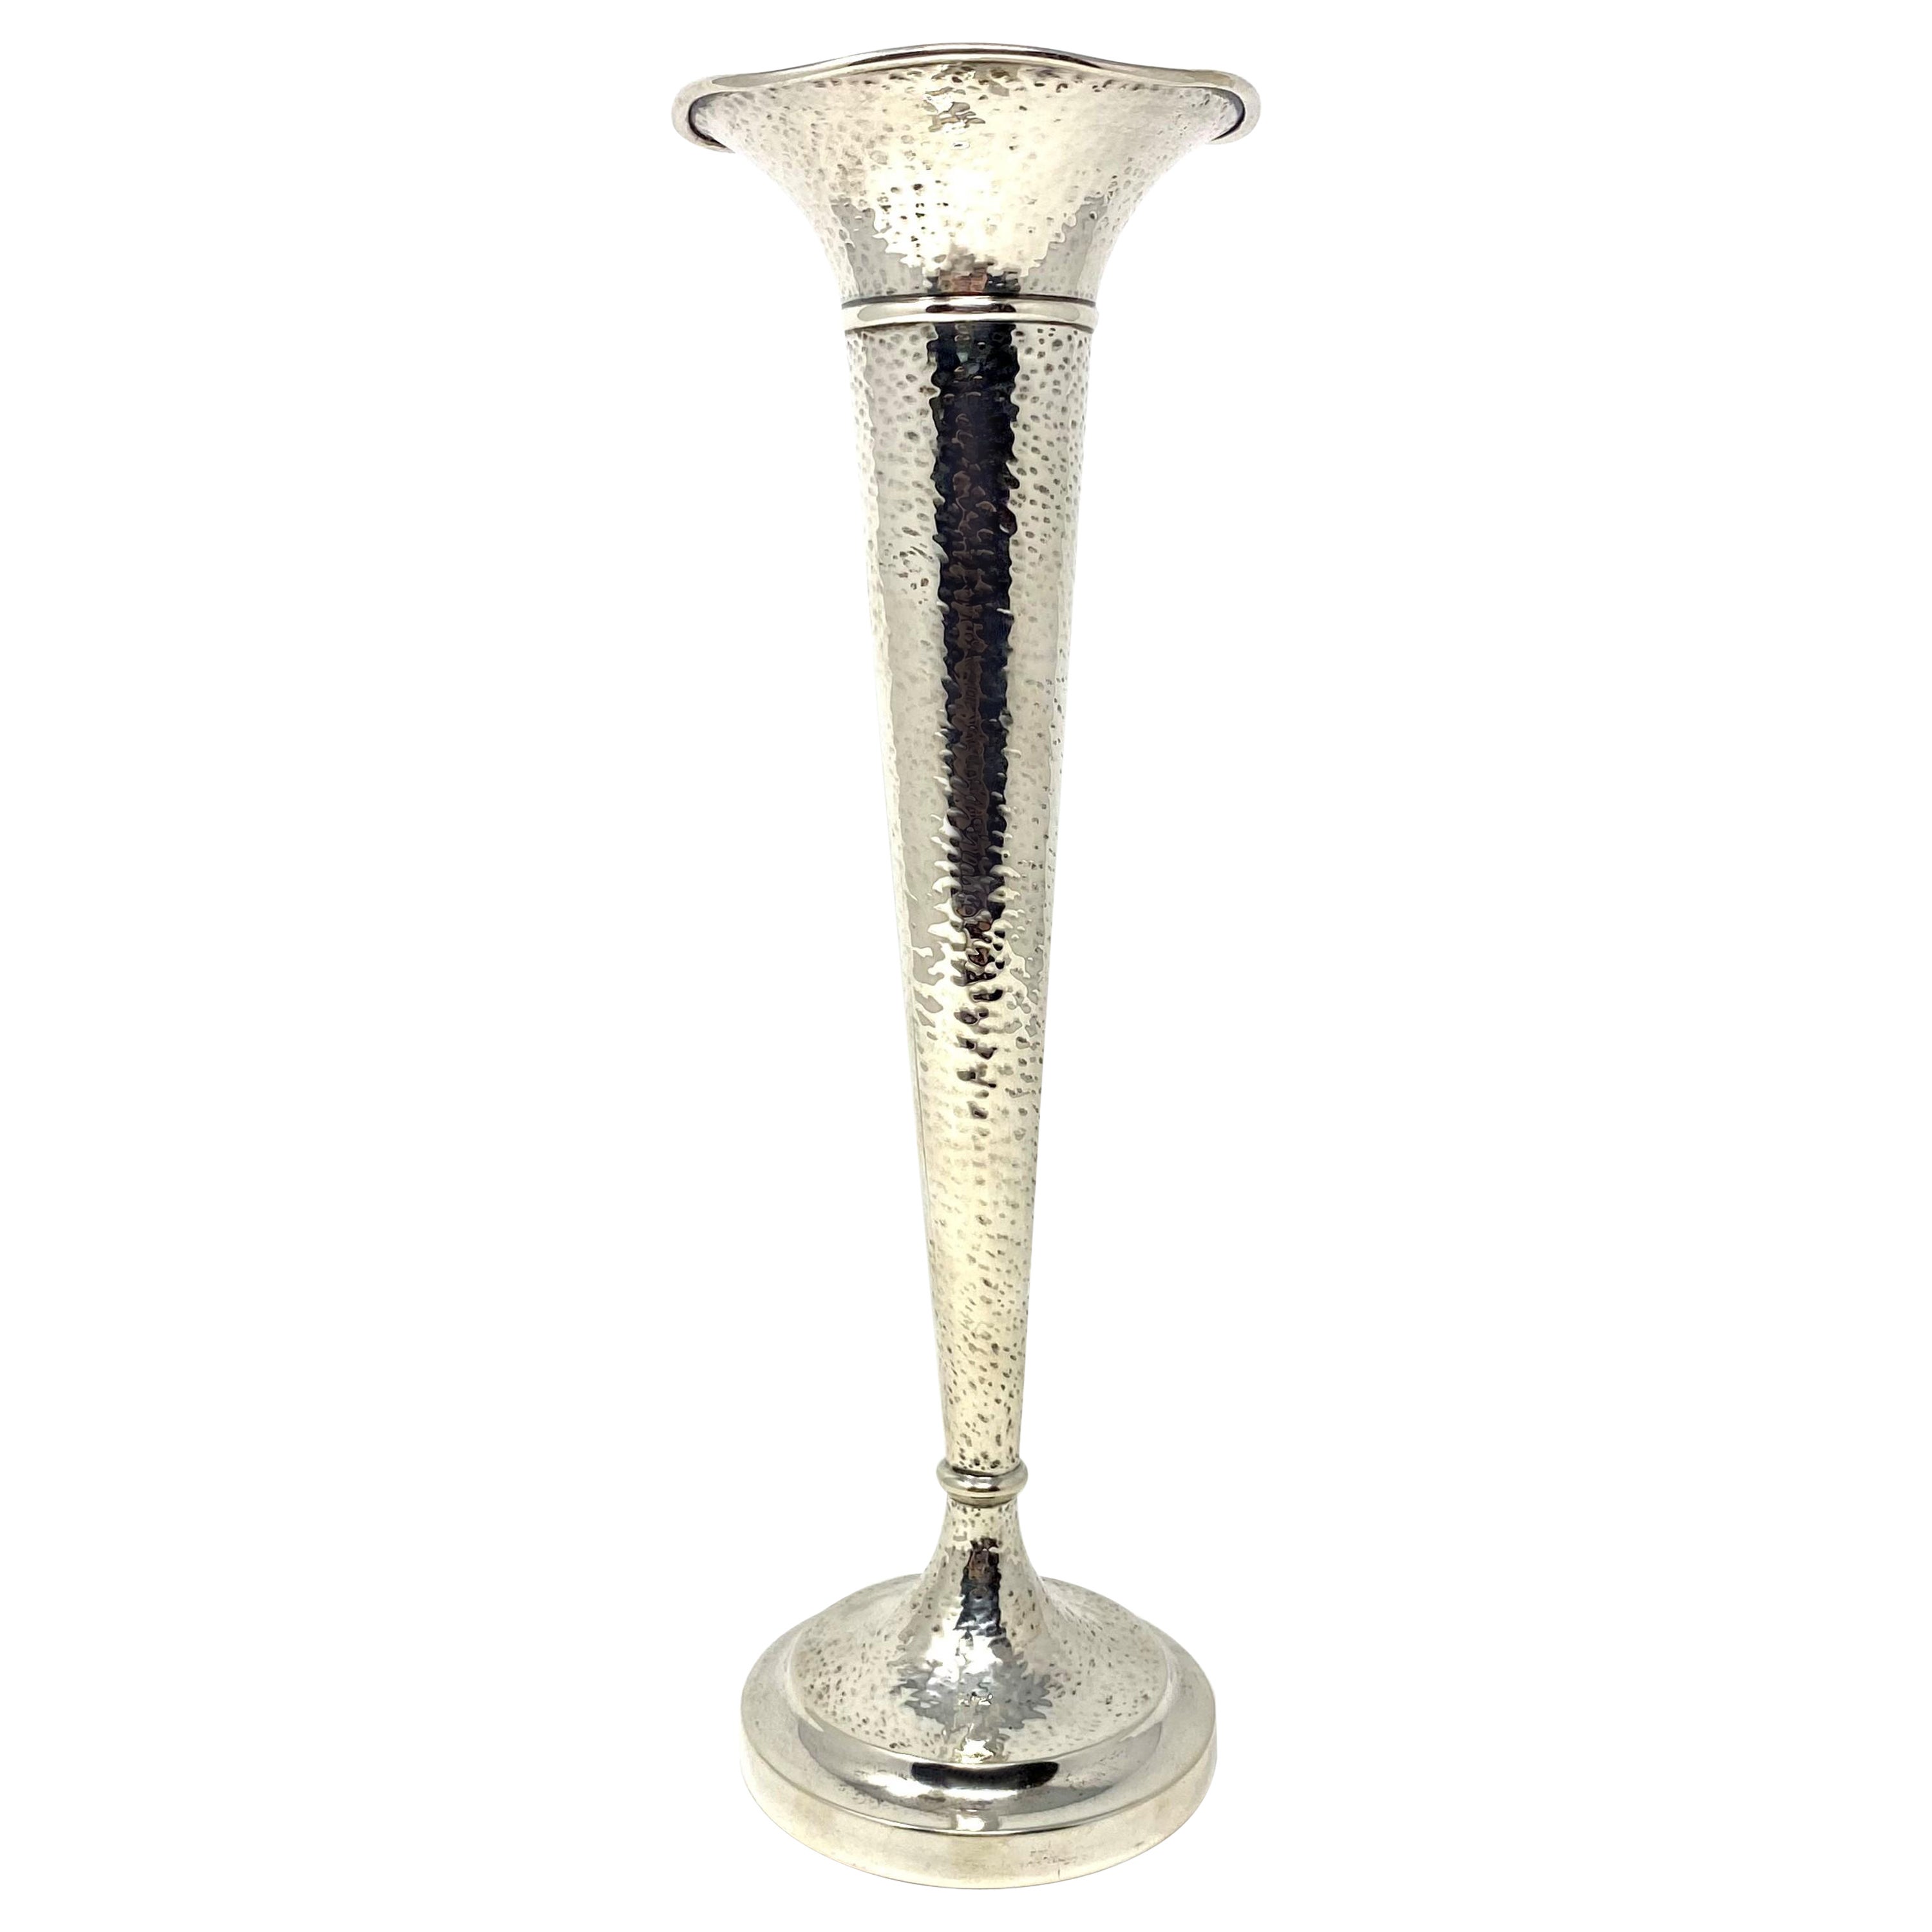 Antique American Hammered Sterling Silver Trumpet Bud Vase, circa 1890's